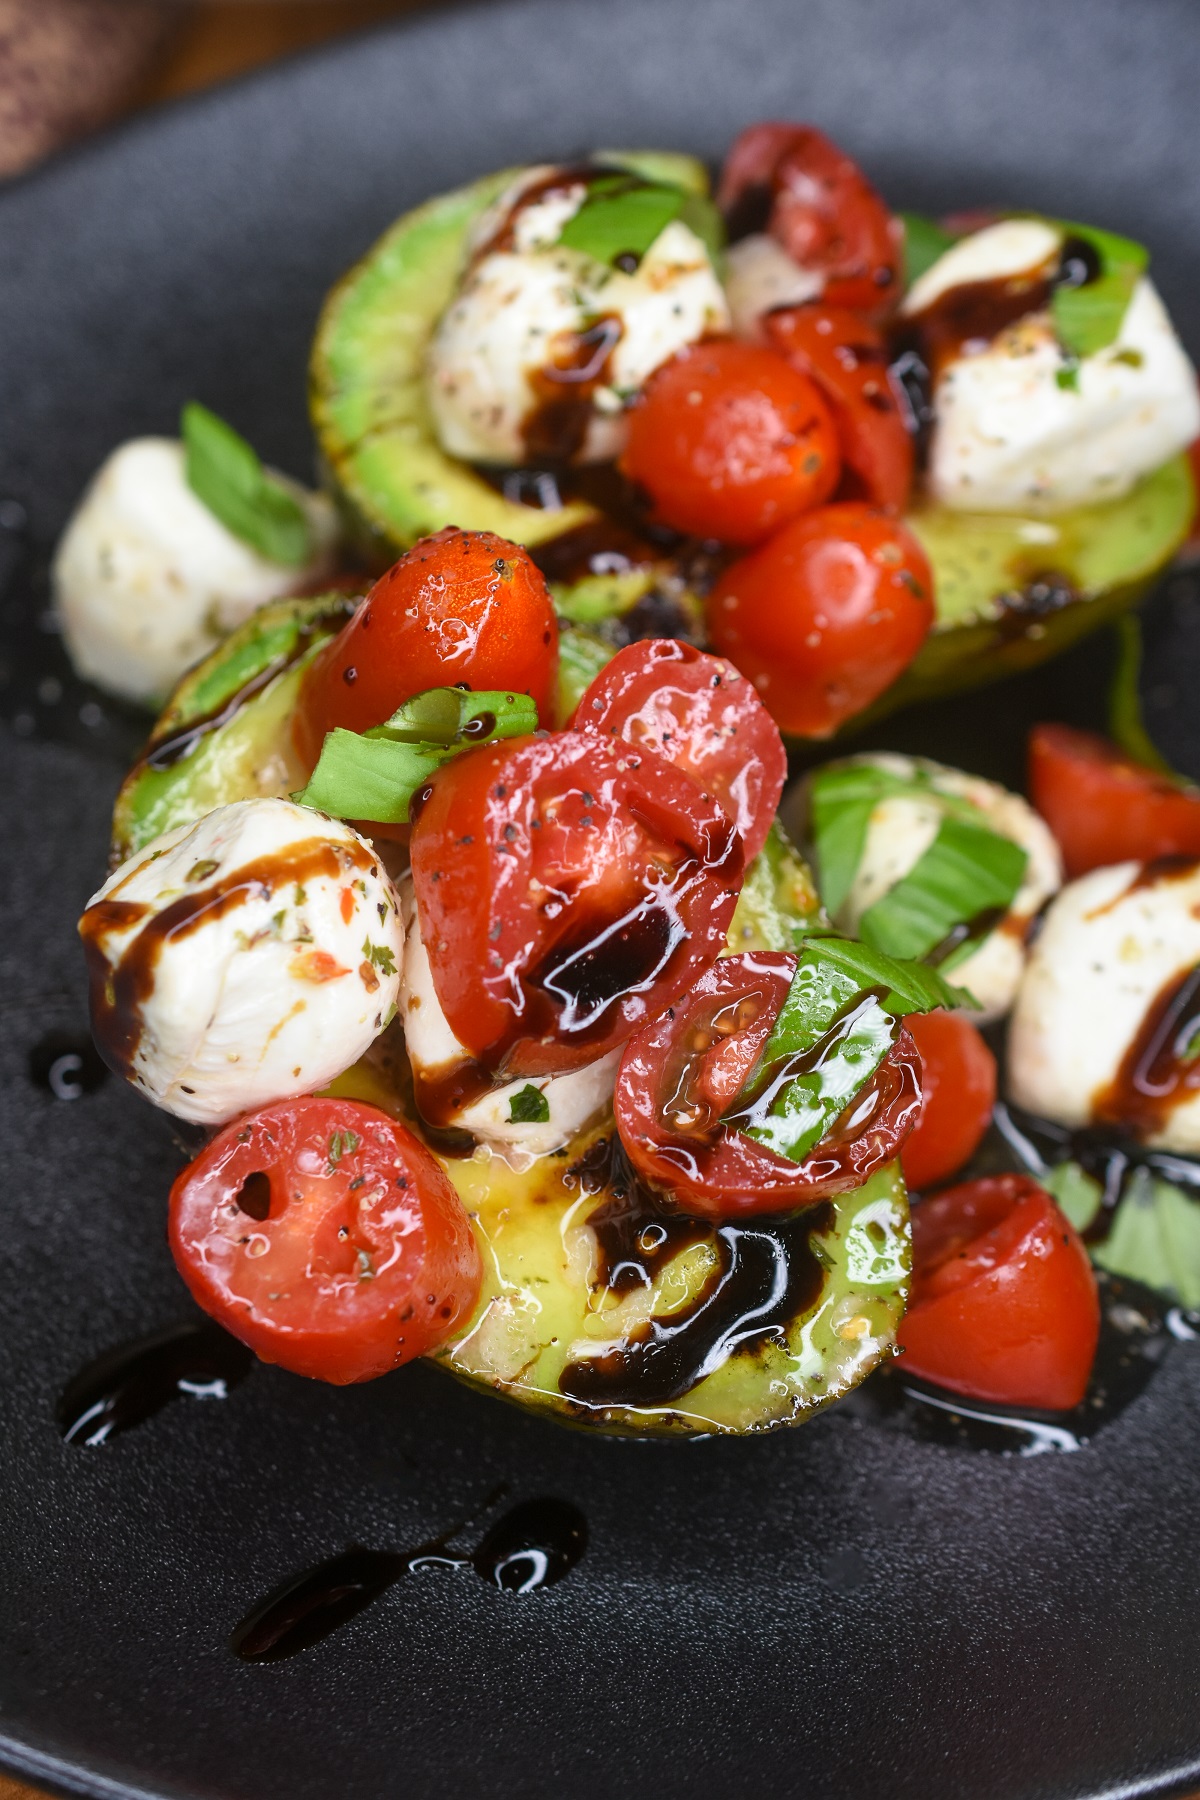 Grilled Avocado stuffed with caprese salad